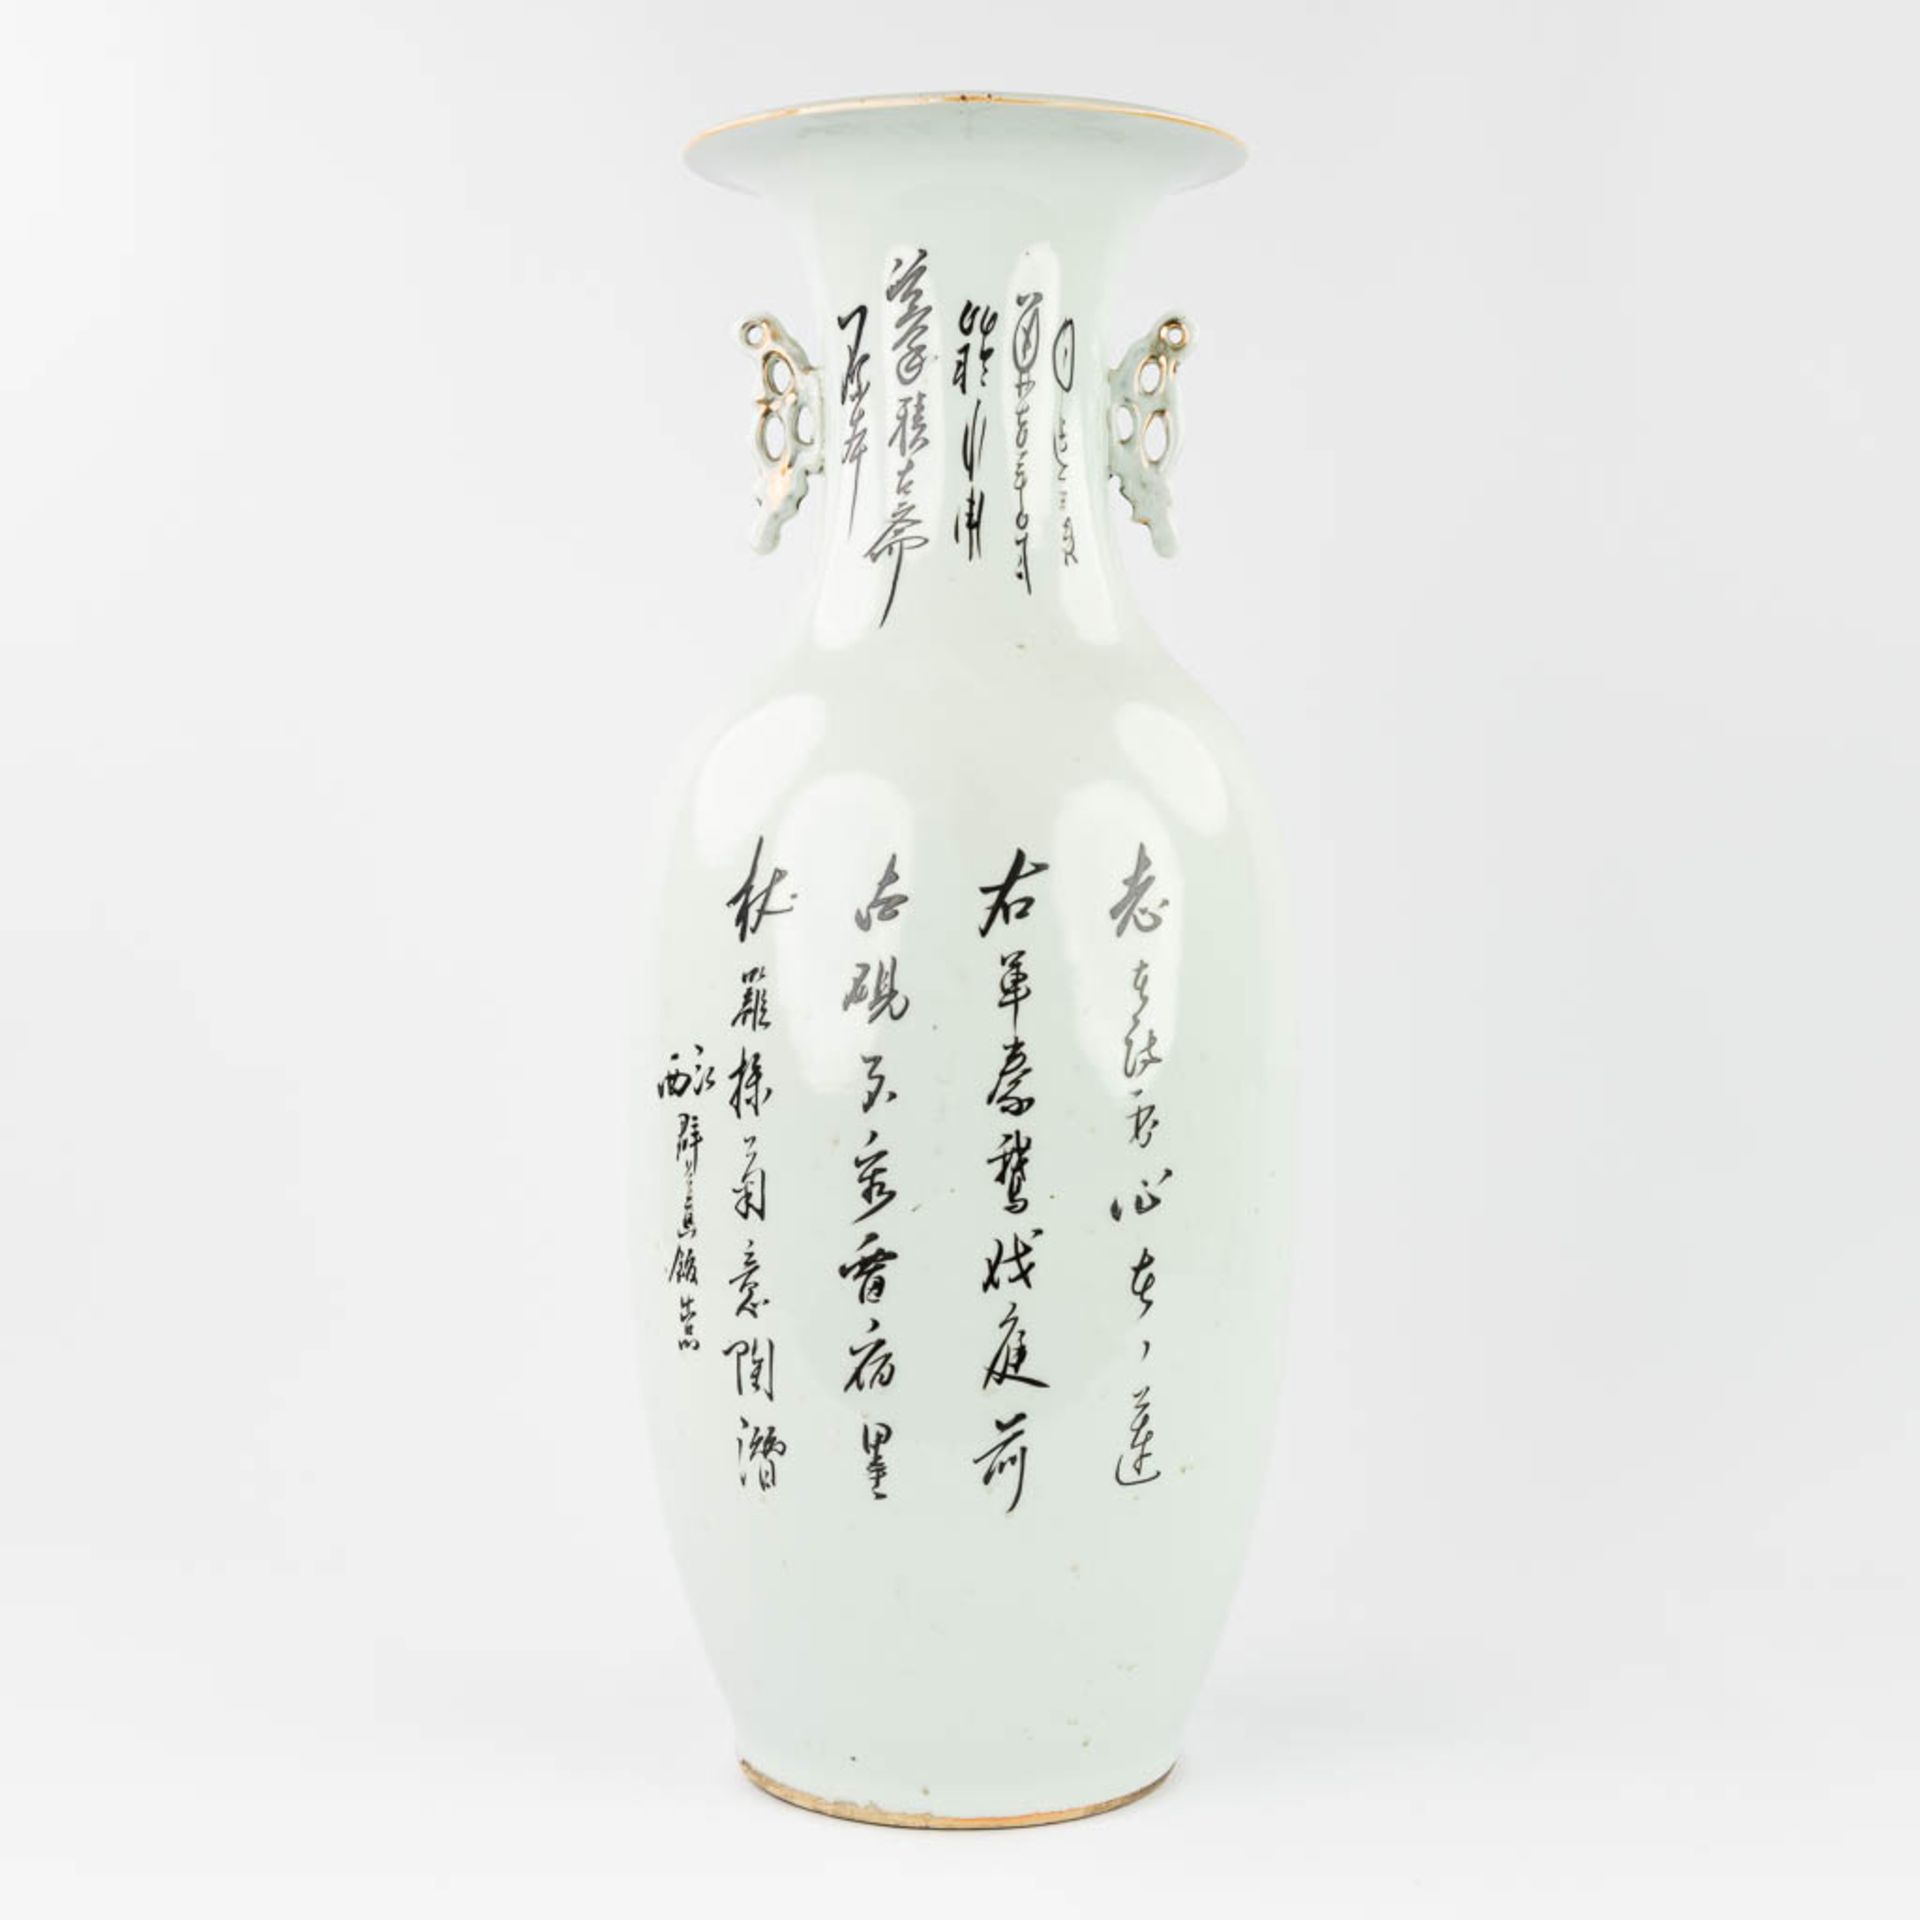 A Chinese vase made of porcelain and decorated with wise men in the garden. (59 x 23 cm) - Image 13 of 14